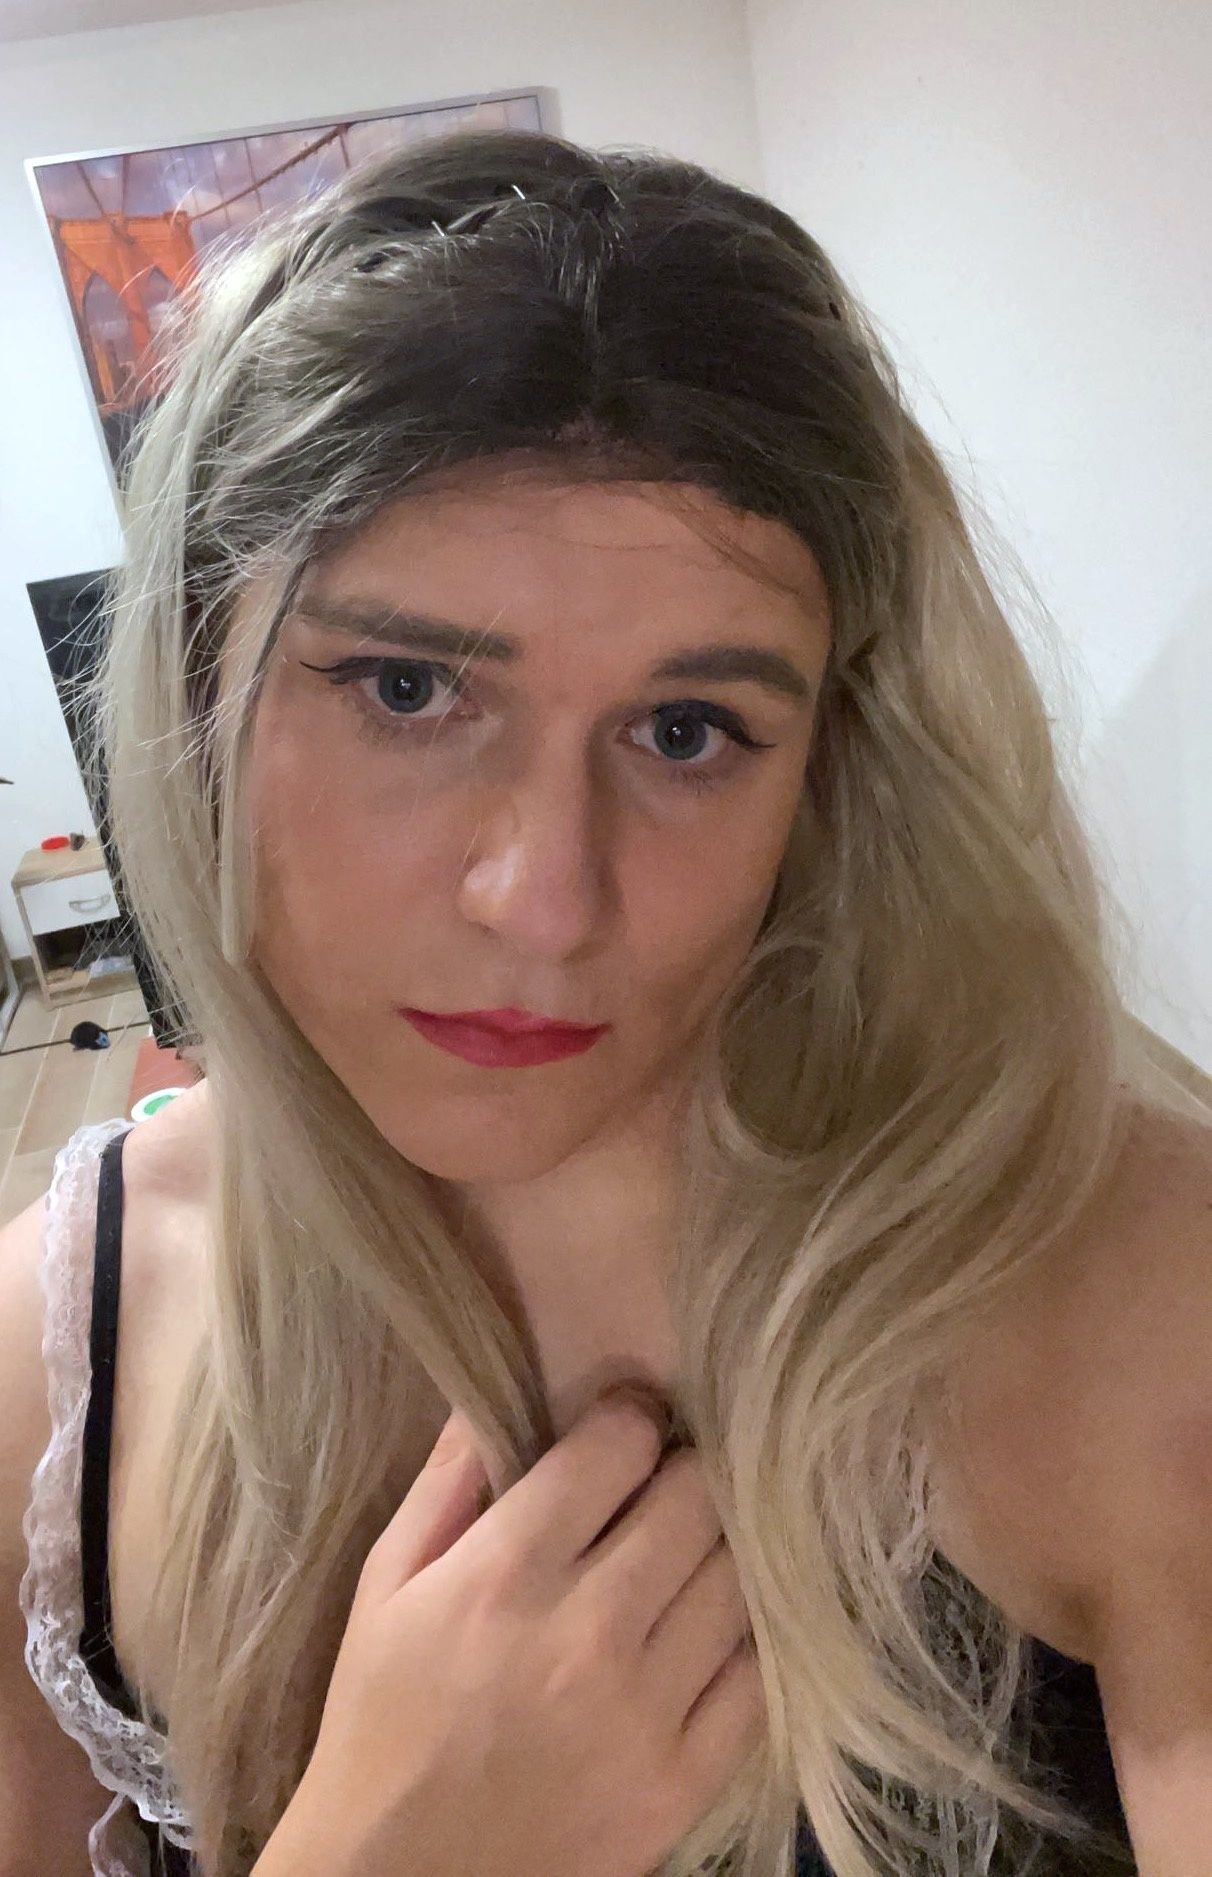 Sissy vallicxte: Love this wig  #5